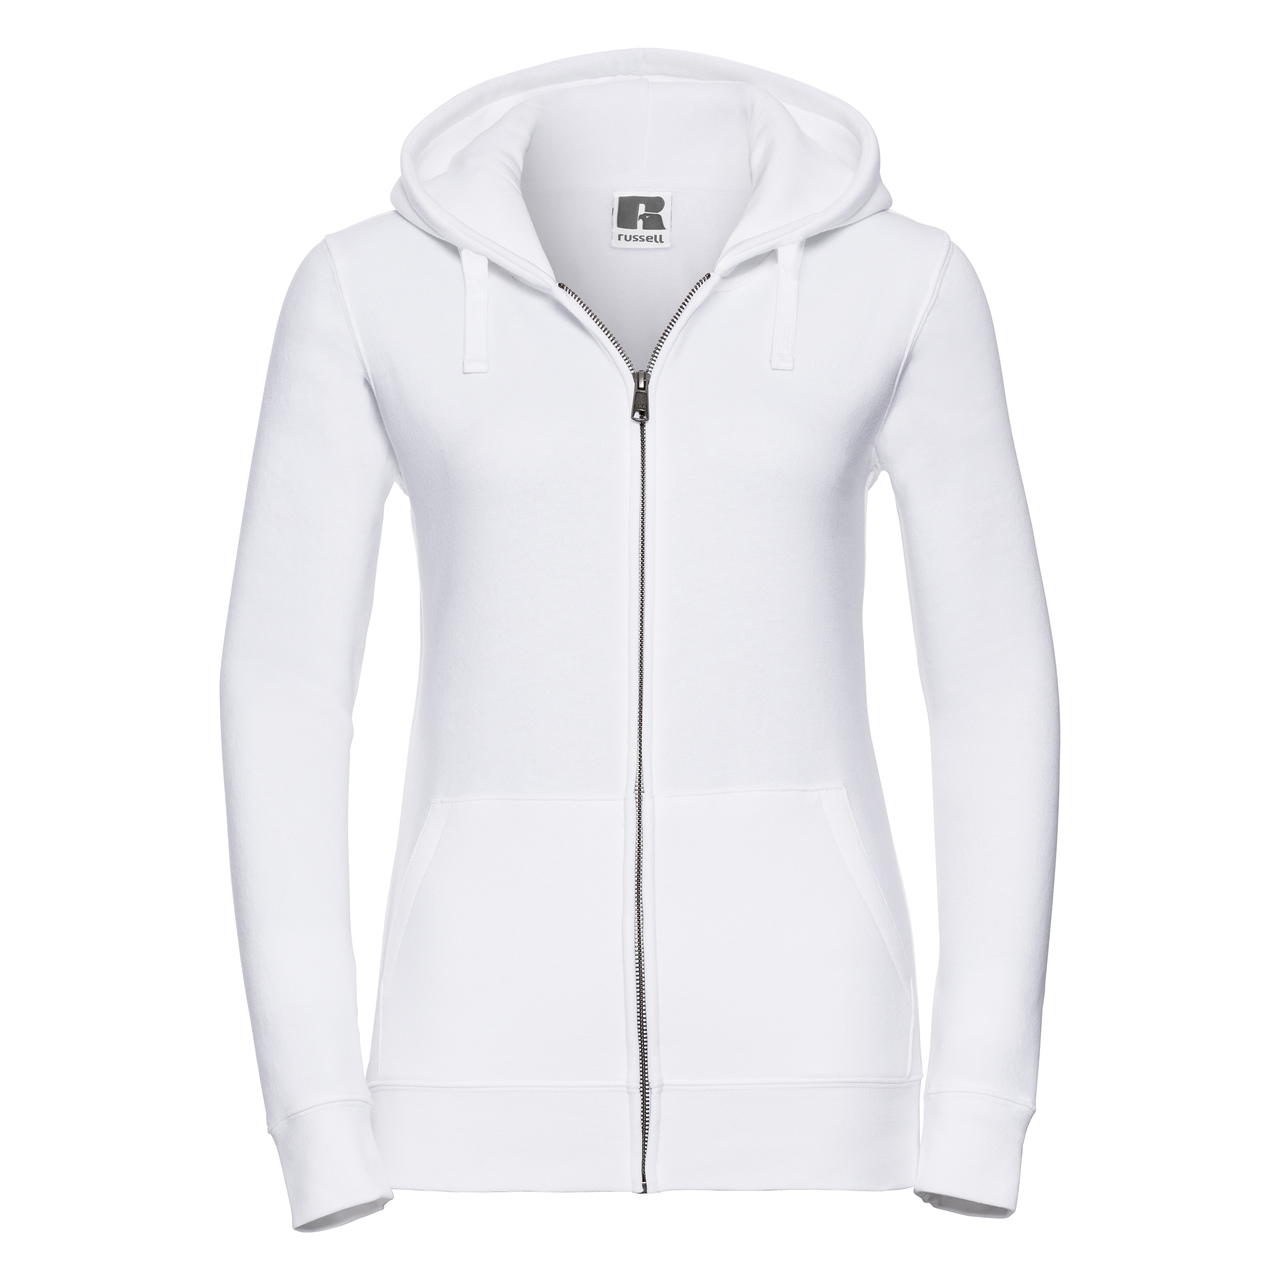 LADIES AUTHENTIC ZIPPED HOOD JACKET | Russell